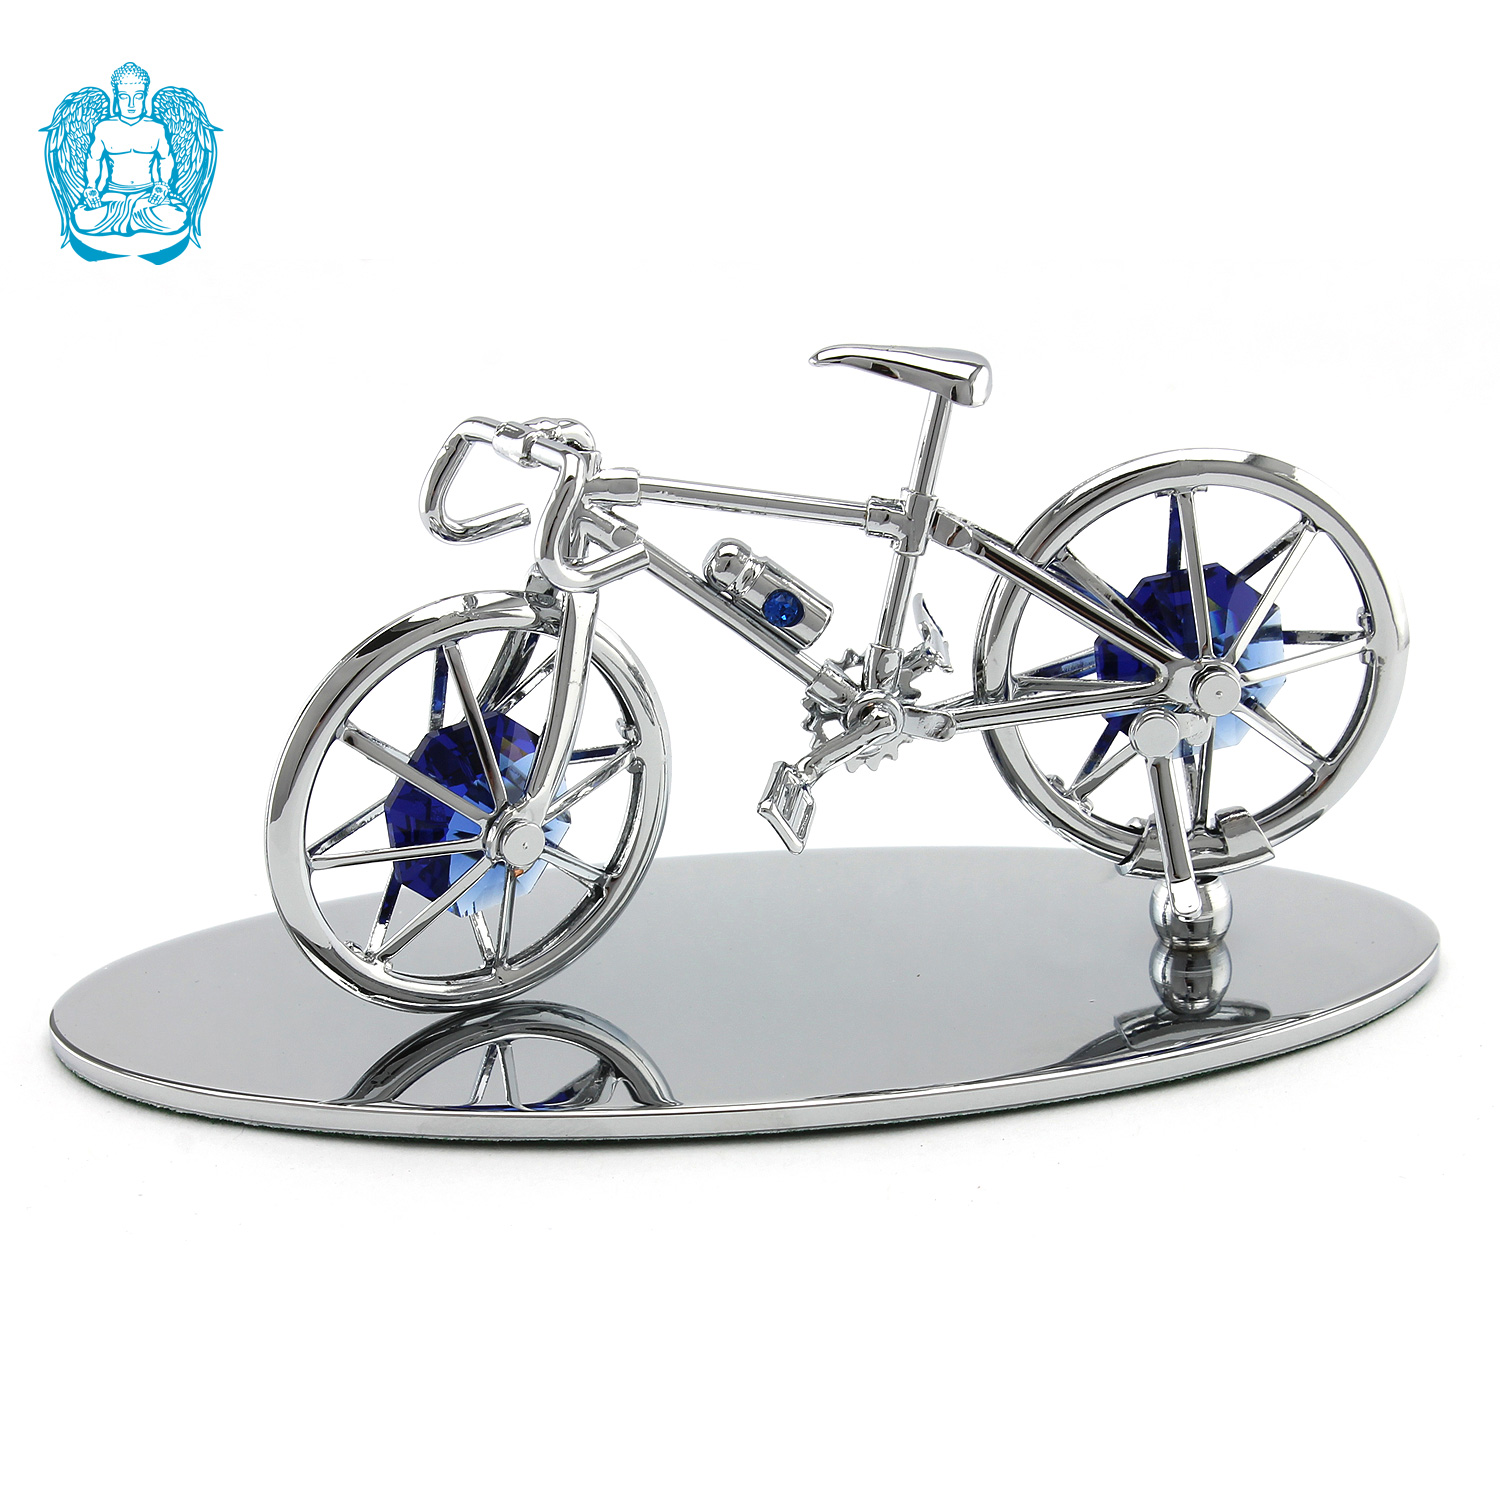 Crystocraft Bicycle - Silver/Blue